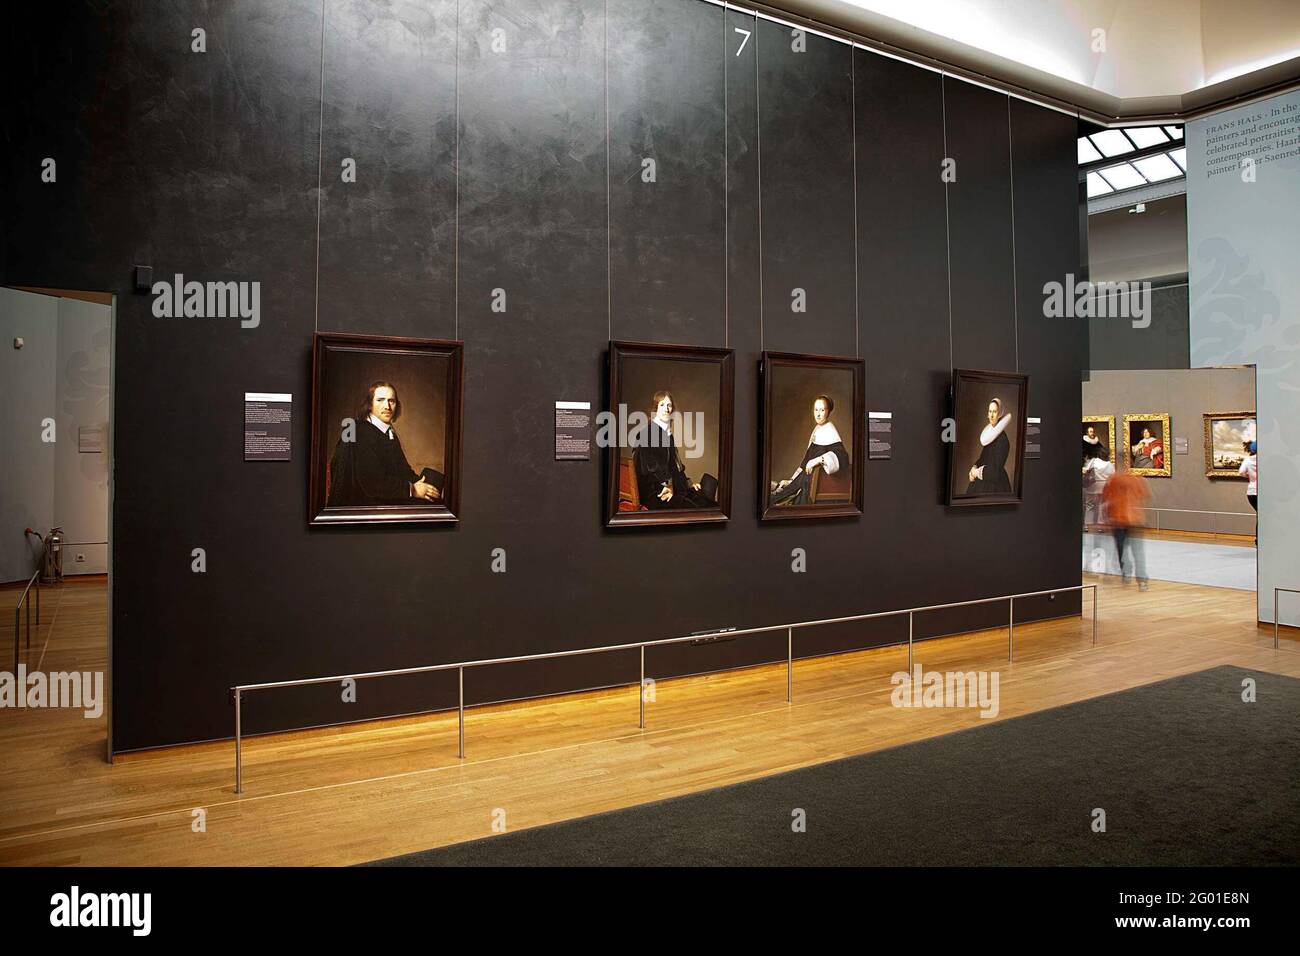 Wall with portraits of Dirck, Johannes of Jacobus Wallis, Eduard Wallis, Maria van Strijp and Adriana Croes, on the right a look to another room; Exhibition New acquisitions: Four portraits of Johannes Cornelisz Terspronck. Stock Photo